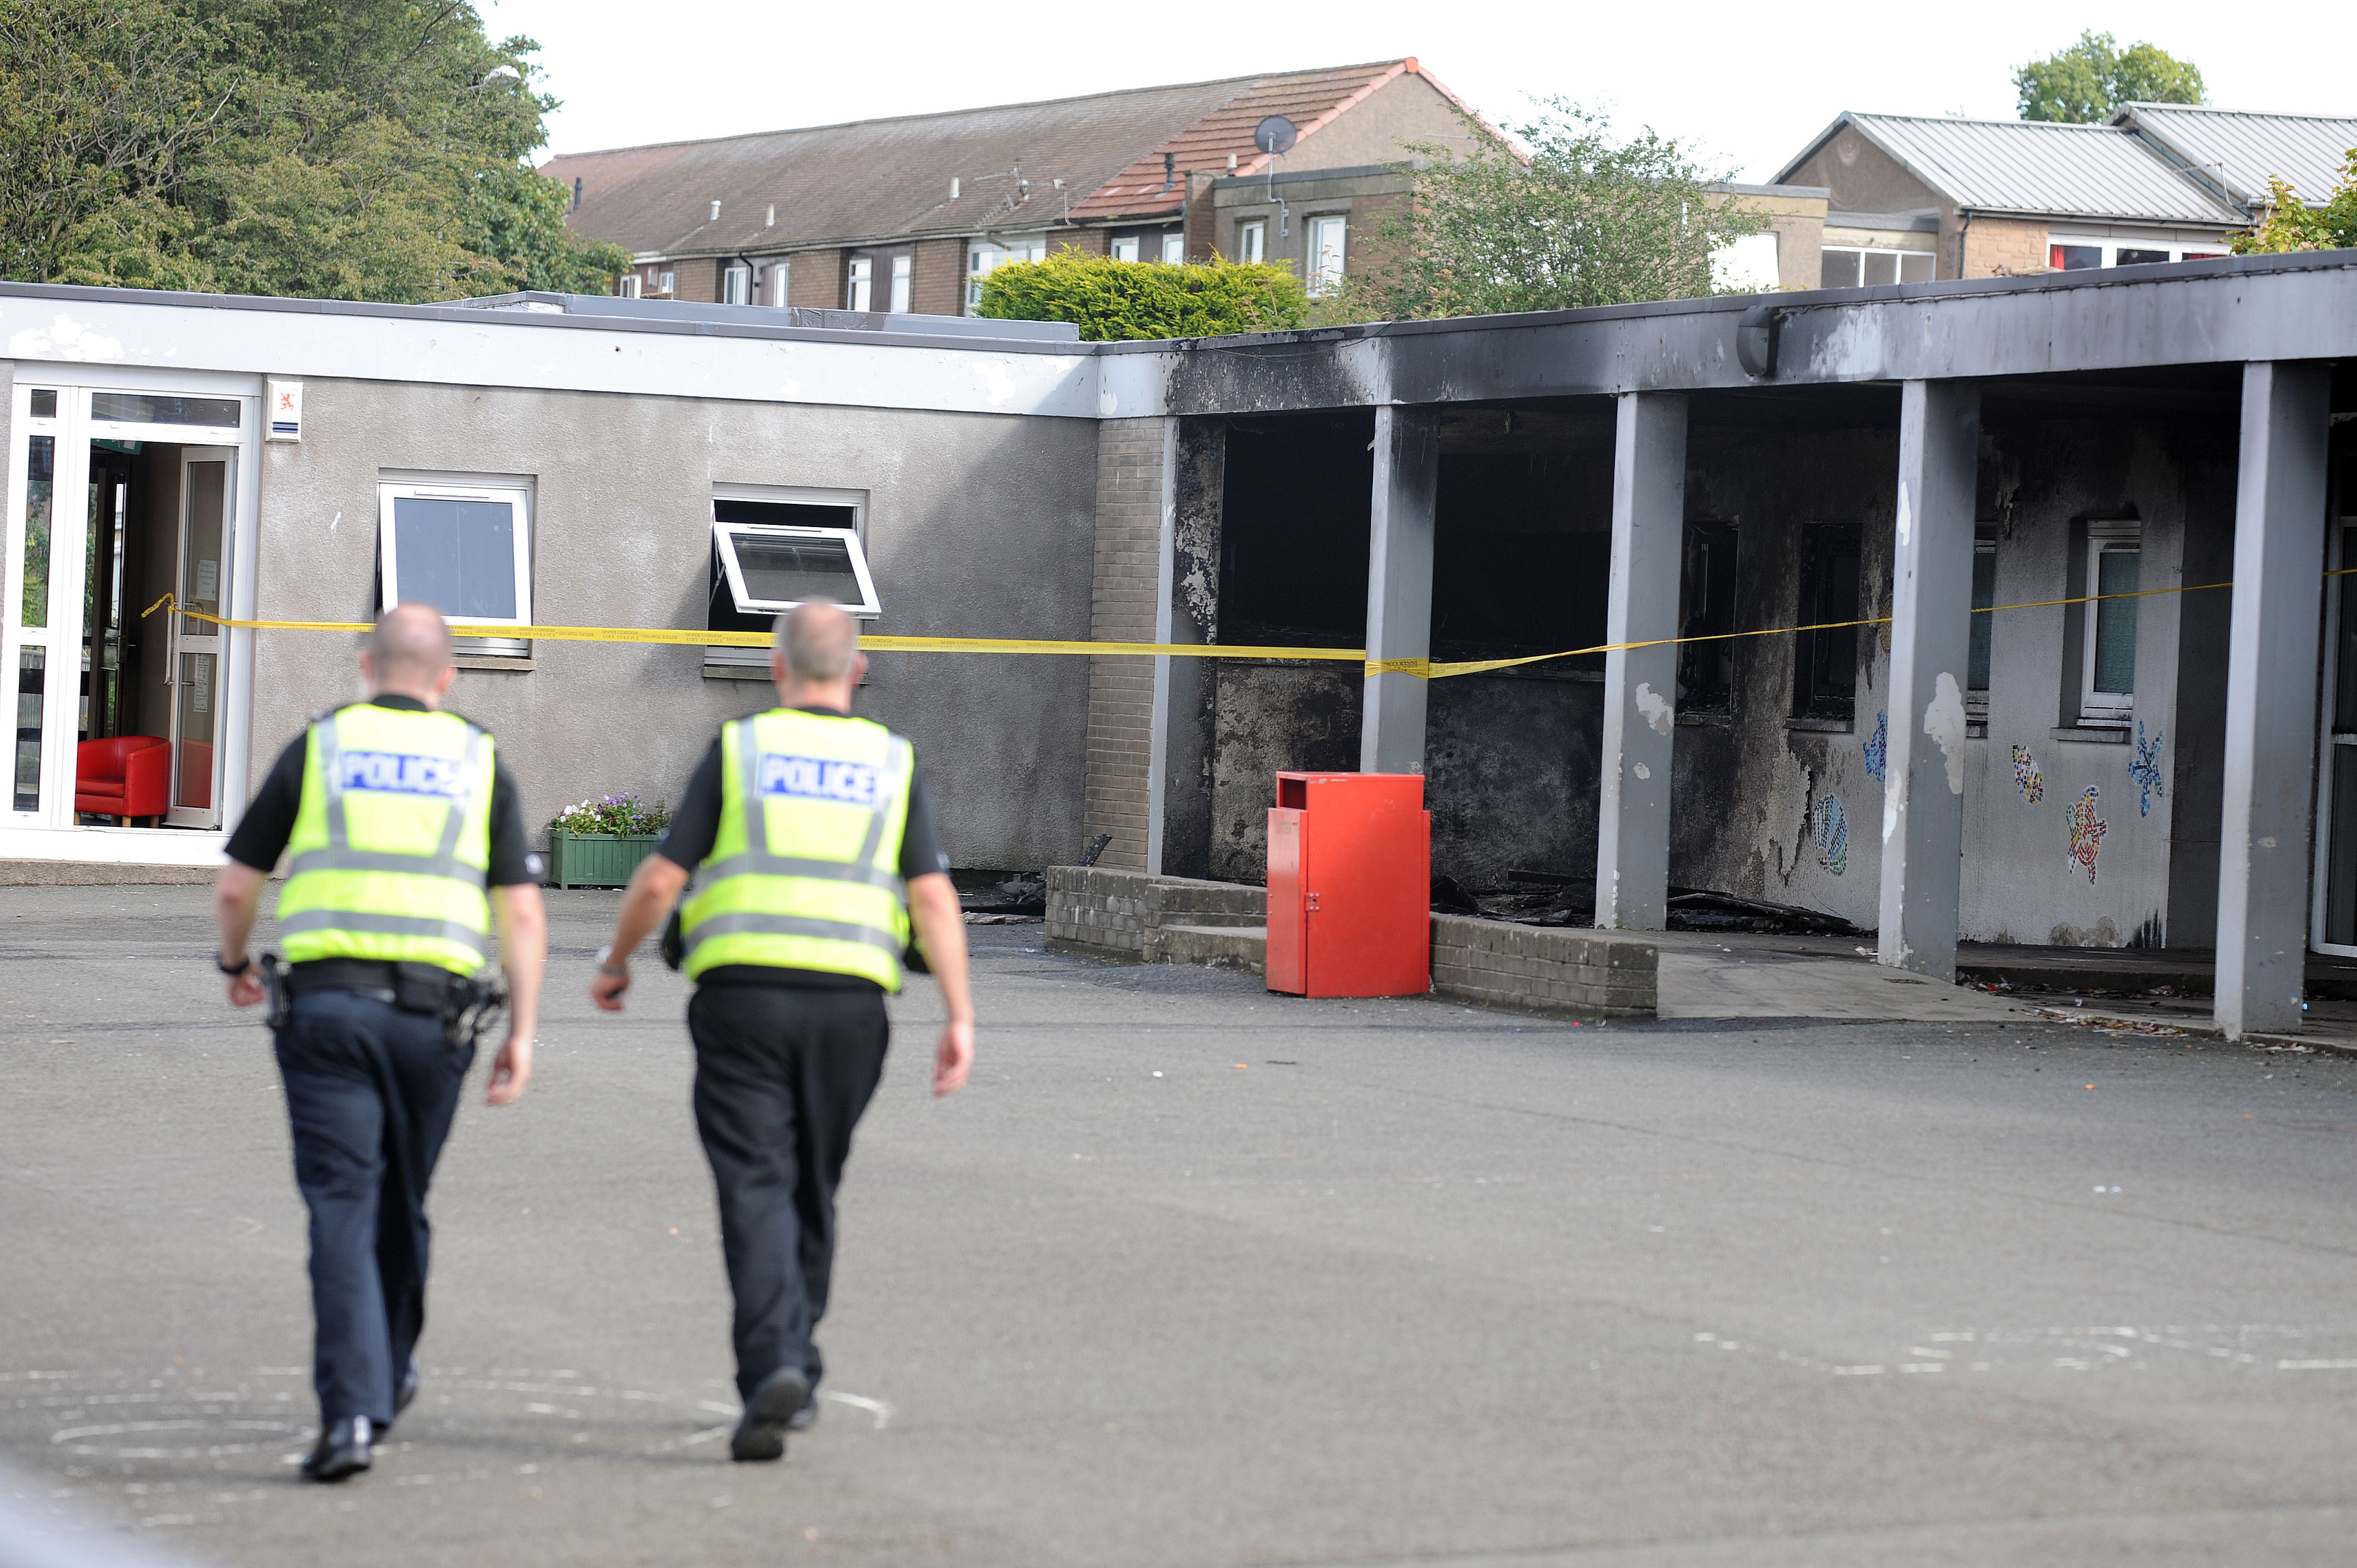 Police at the scene of the weekend blaze.